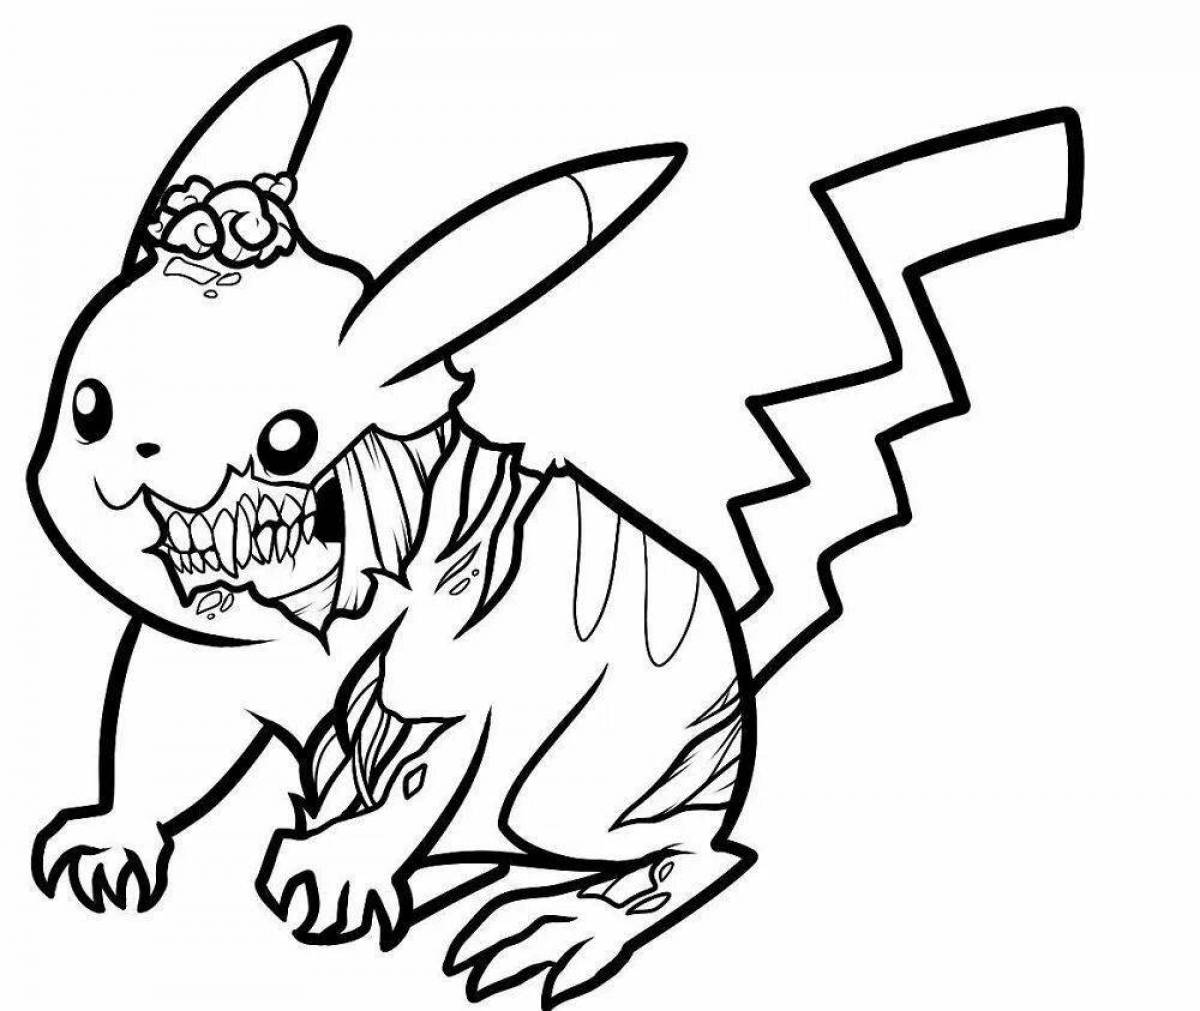 Grotesque mutant zombie coloring page